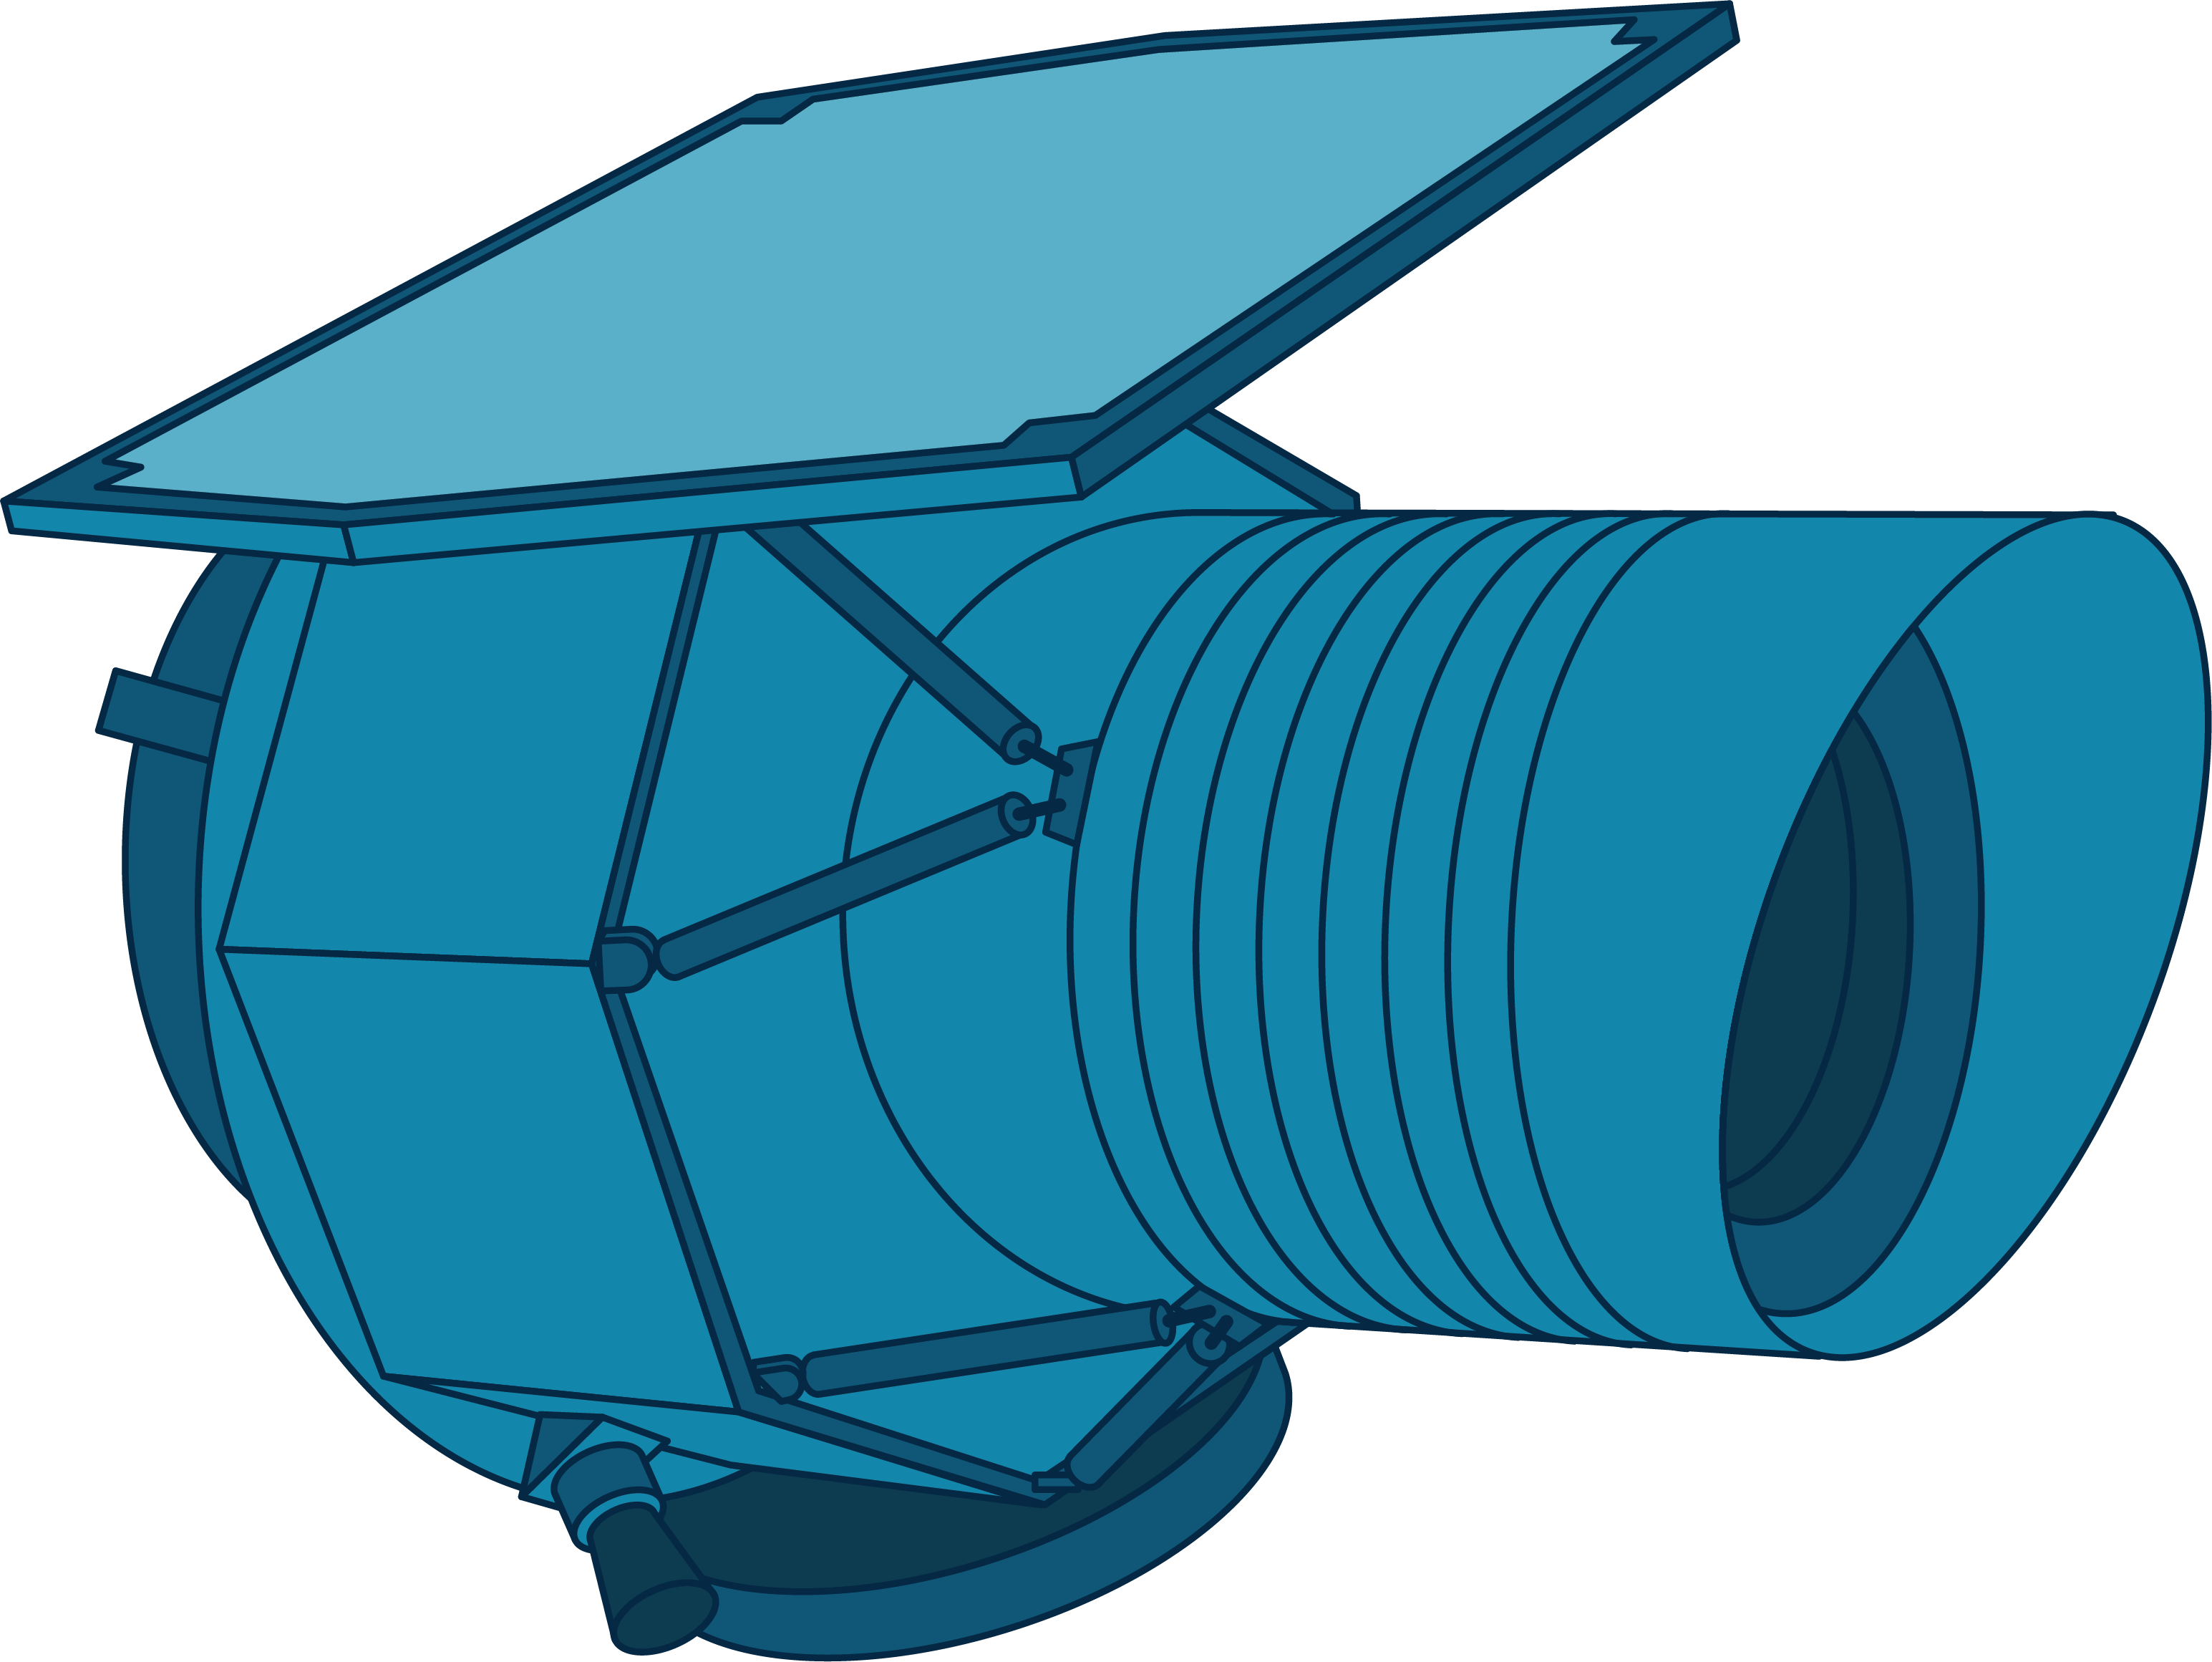 This illustration of NASA's WISE mission shows the spacecraft in shades of blue. WISE has a short, multi-sided cylindrical main body that connects to a thinner and longer open cylindrical piece. The craft's main body is attached to a large, flat panel on top.